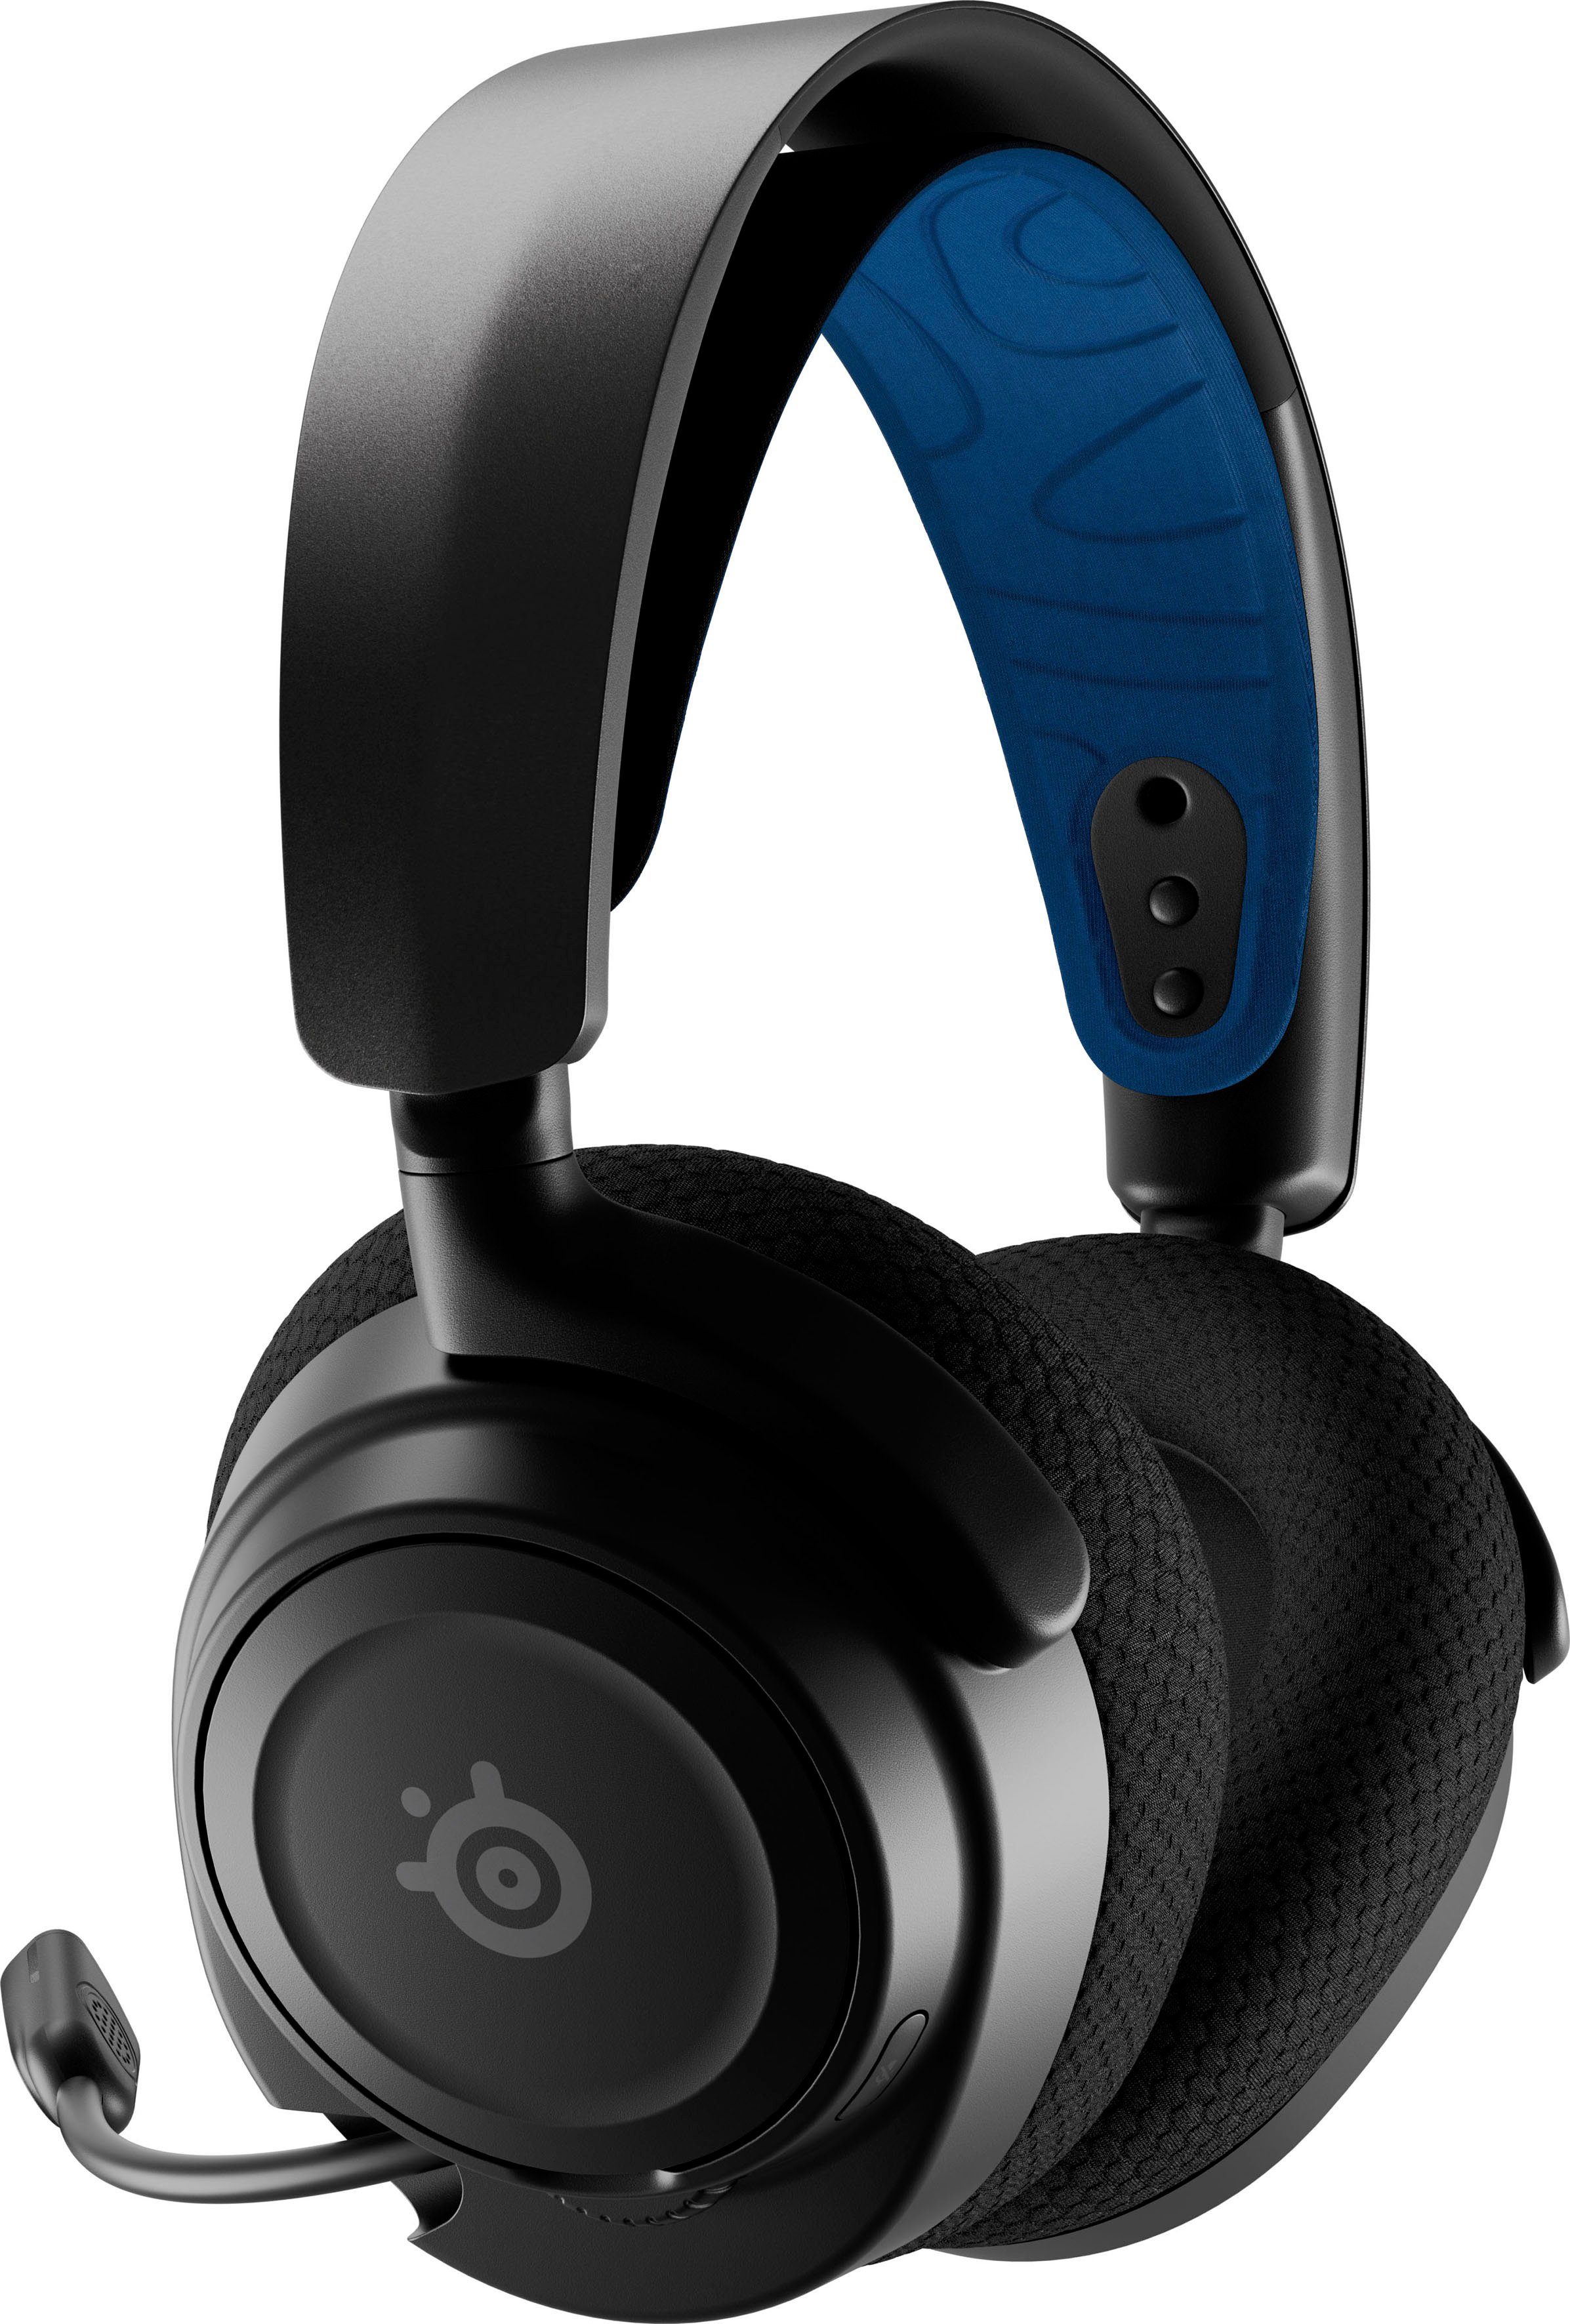 (Noise-Cancelling, Bluetooth, Nova SteelSeries Arctis Wireless) Gaming-Headset 7P